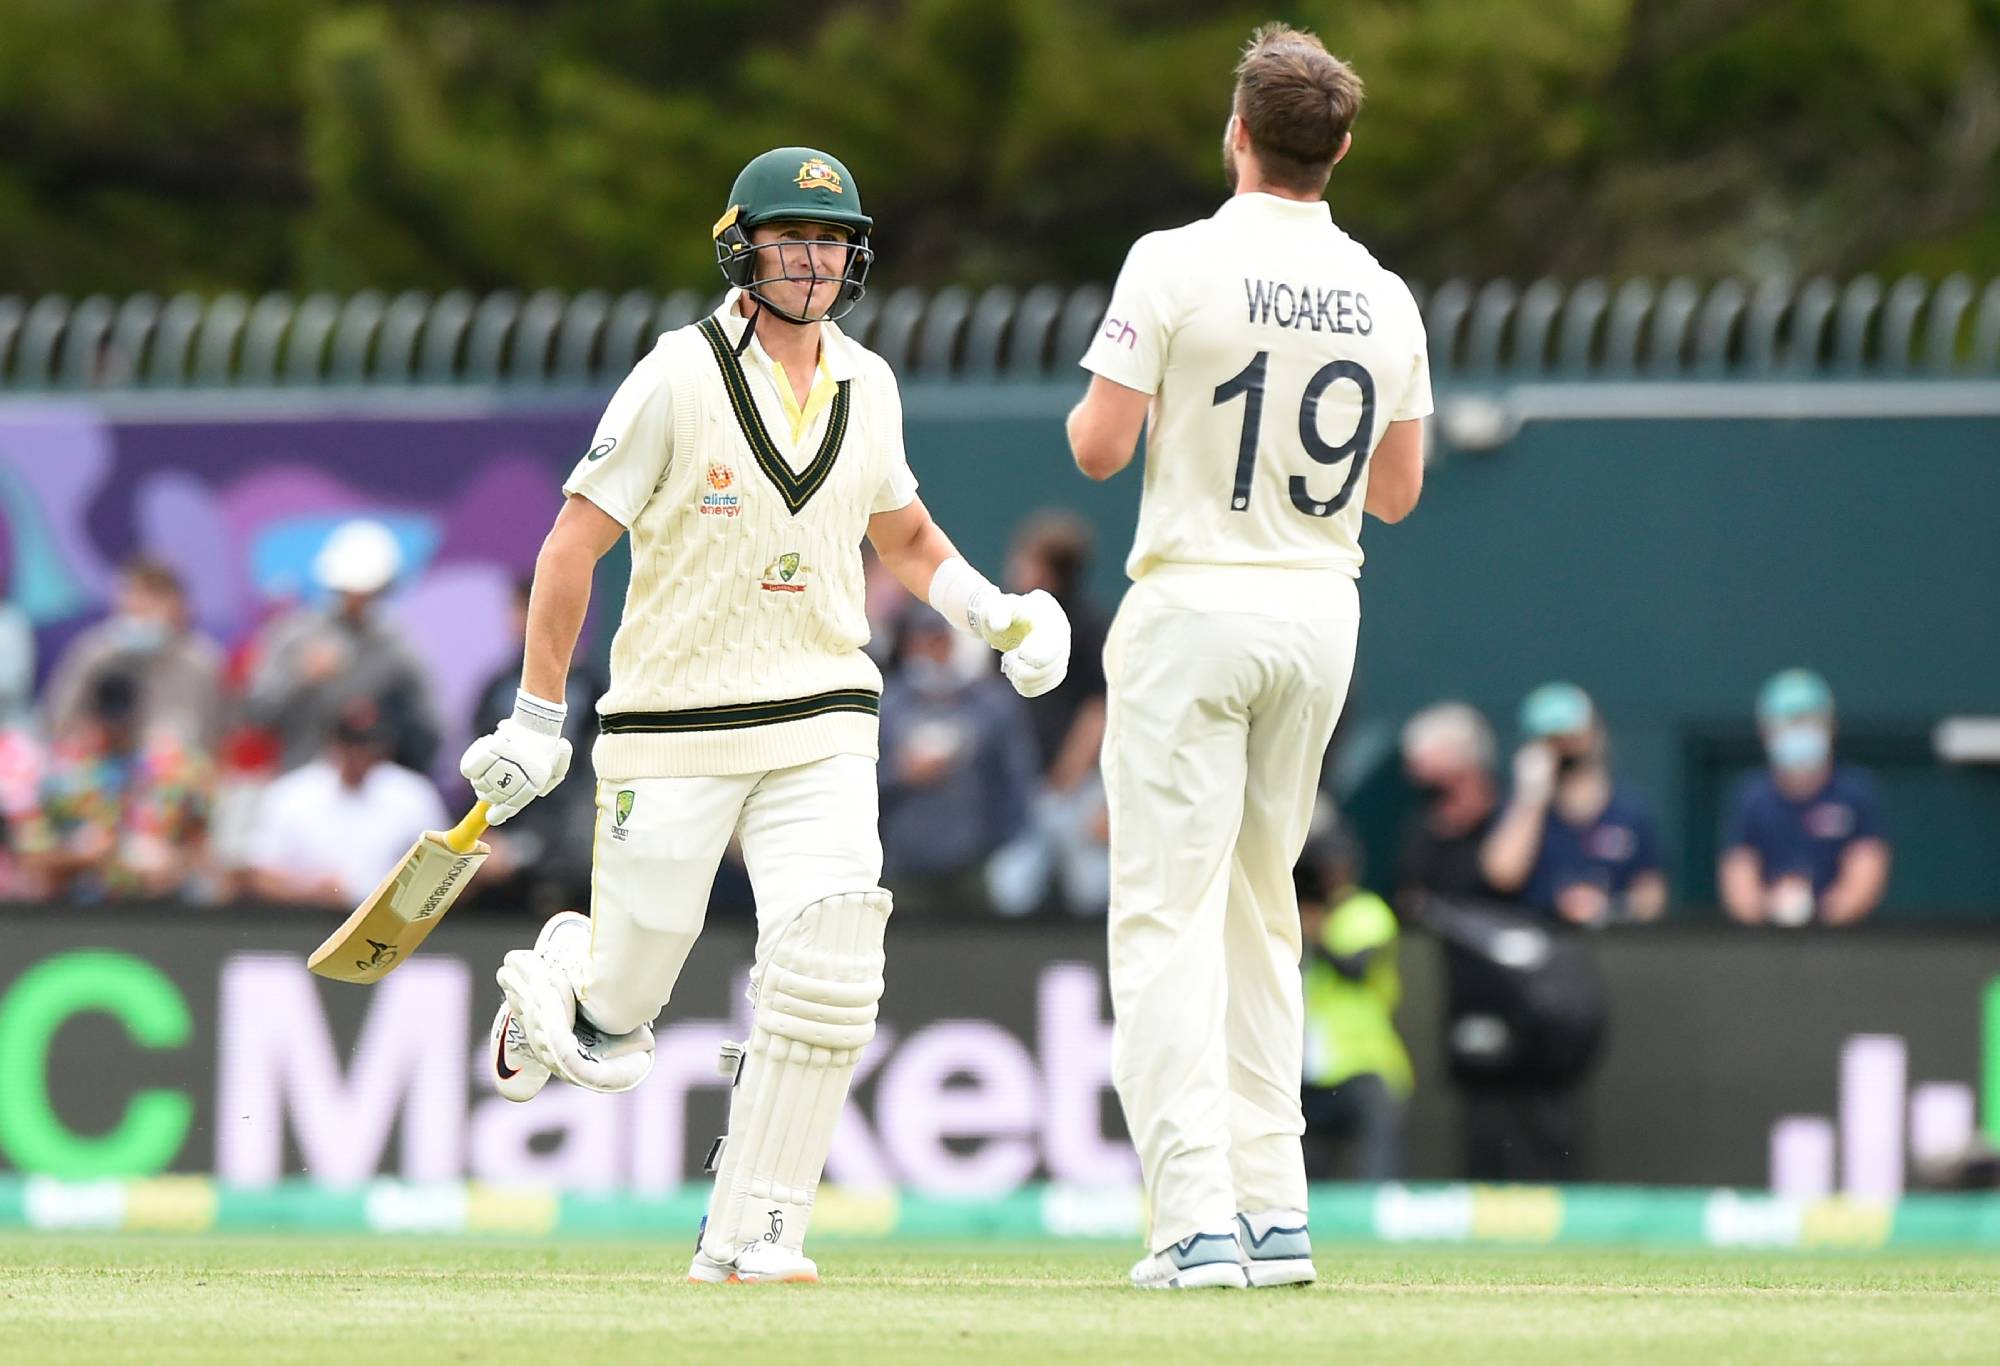 Marnus Labuschagne of Australia smiles at Chris Woakes of England during day one of the Fifth Test in the Ashes series between Australia and England at Blundstone Arena on January 14, 2022 in Hobart, Australia. (Photo by Matt Roberts - CA/Cricket Australia via Getty Images)